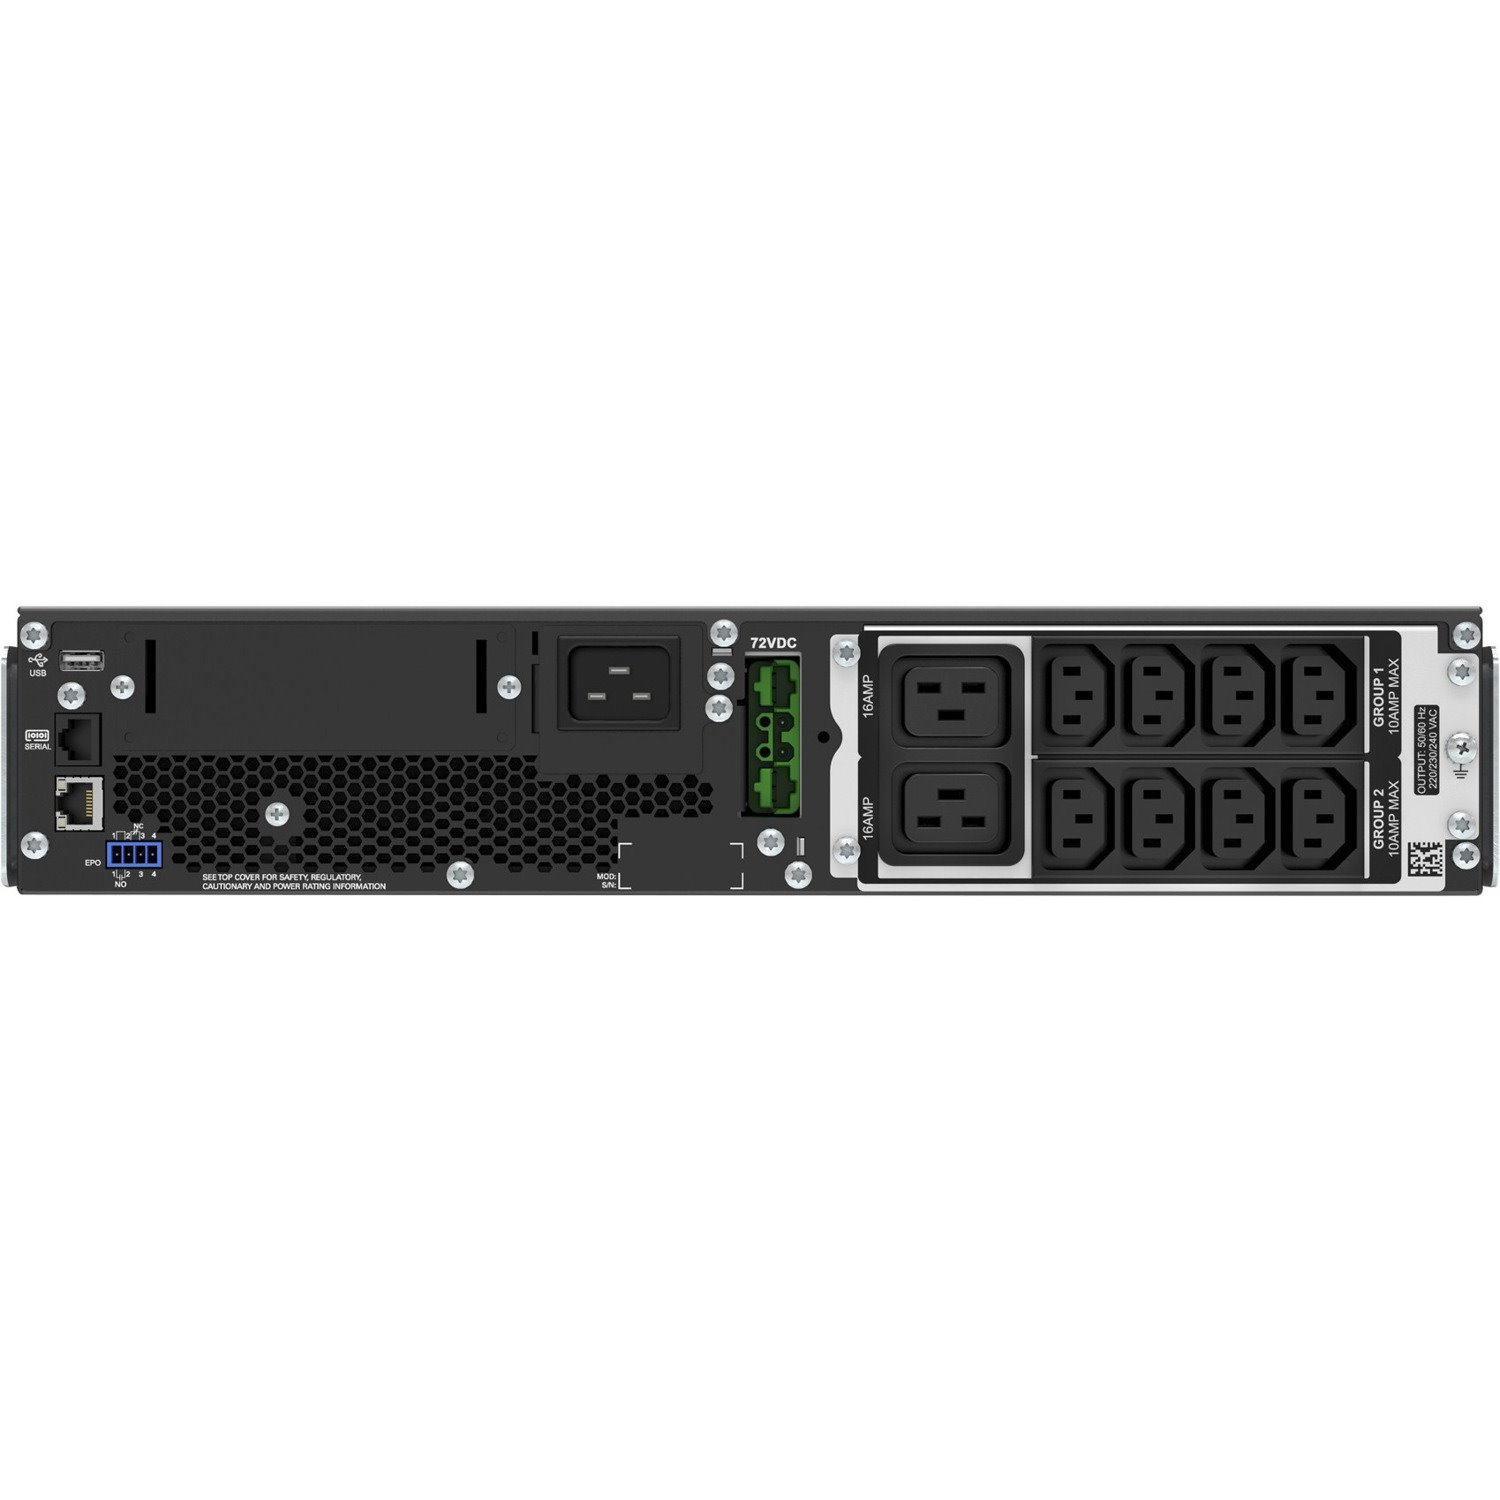 APC by Schneider Electric Smart-UPS Double Conversion Online UPS - 2.20 kVA/1.98 kW